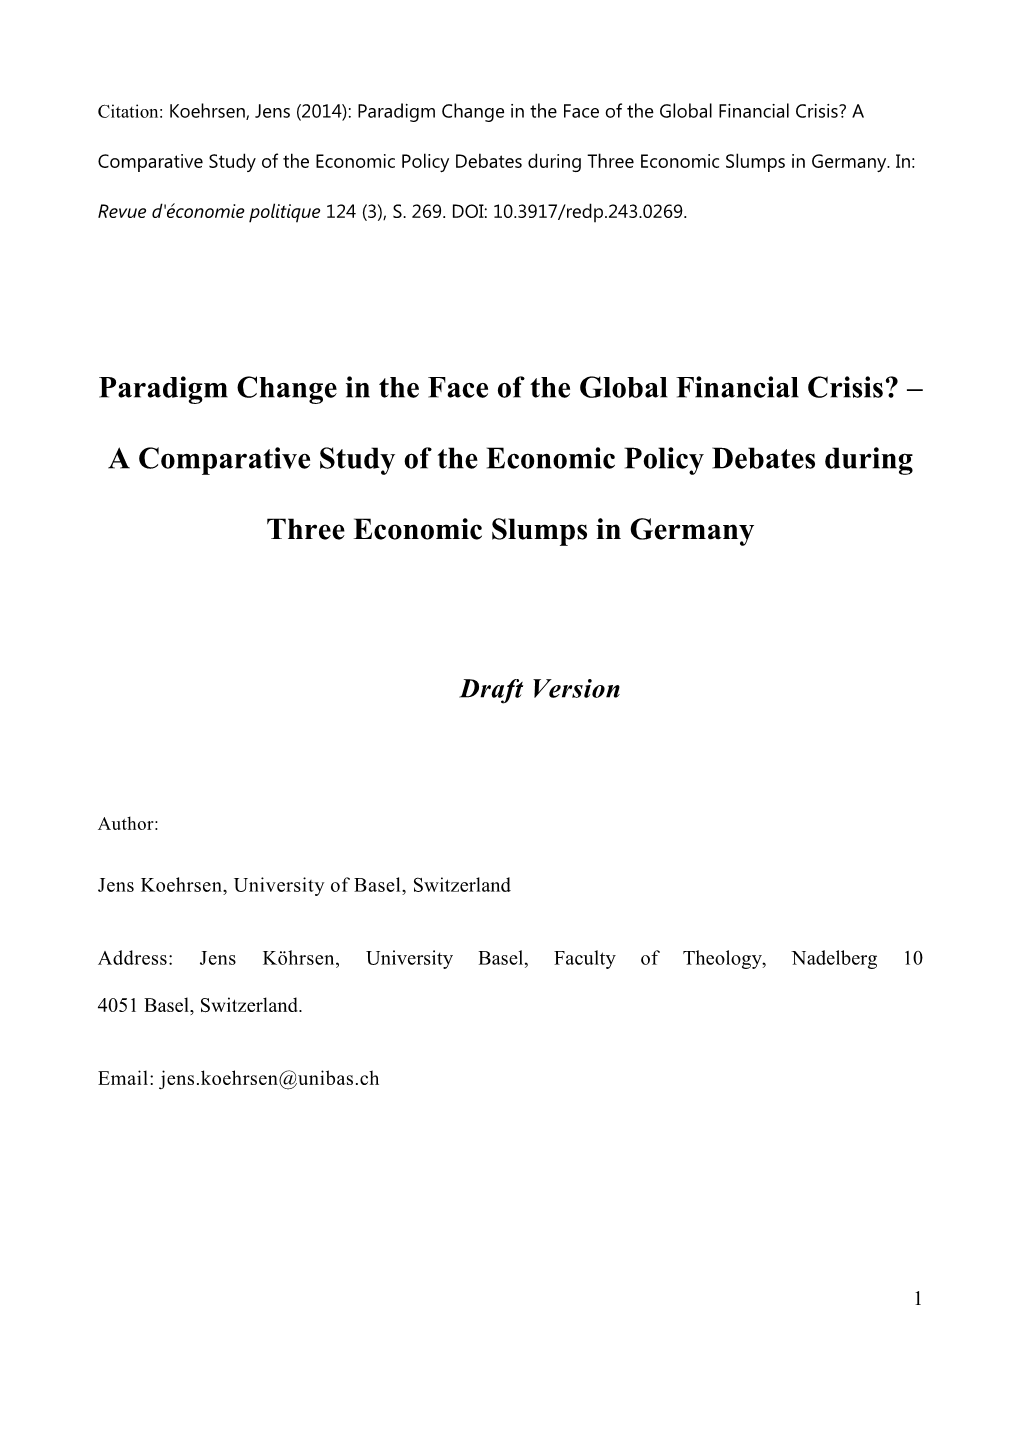 Paradigm Change in the Face of the Global Financial Crisis? – A